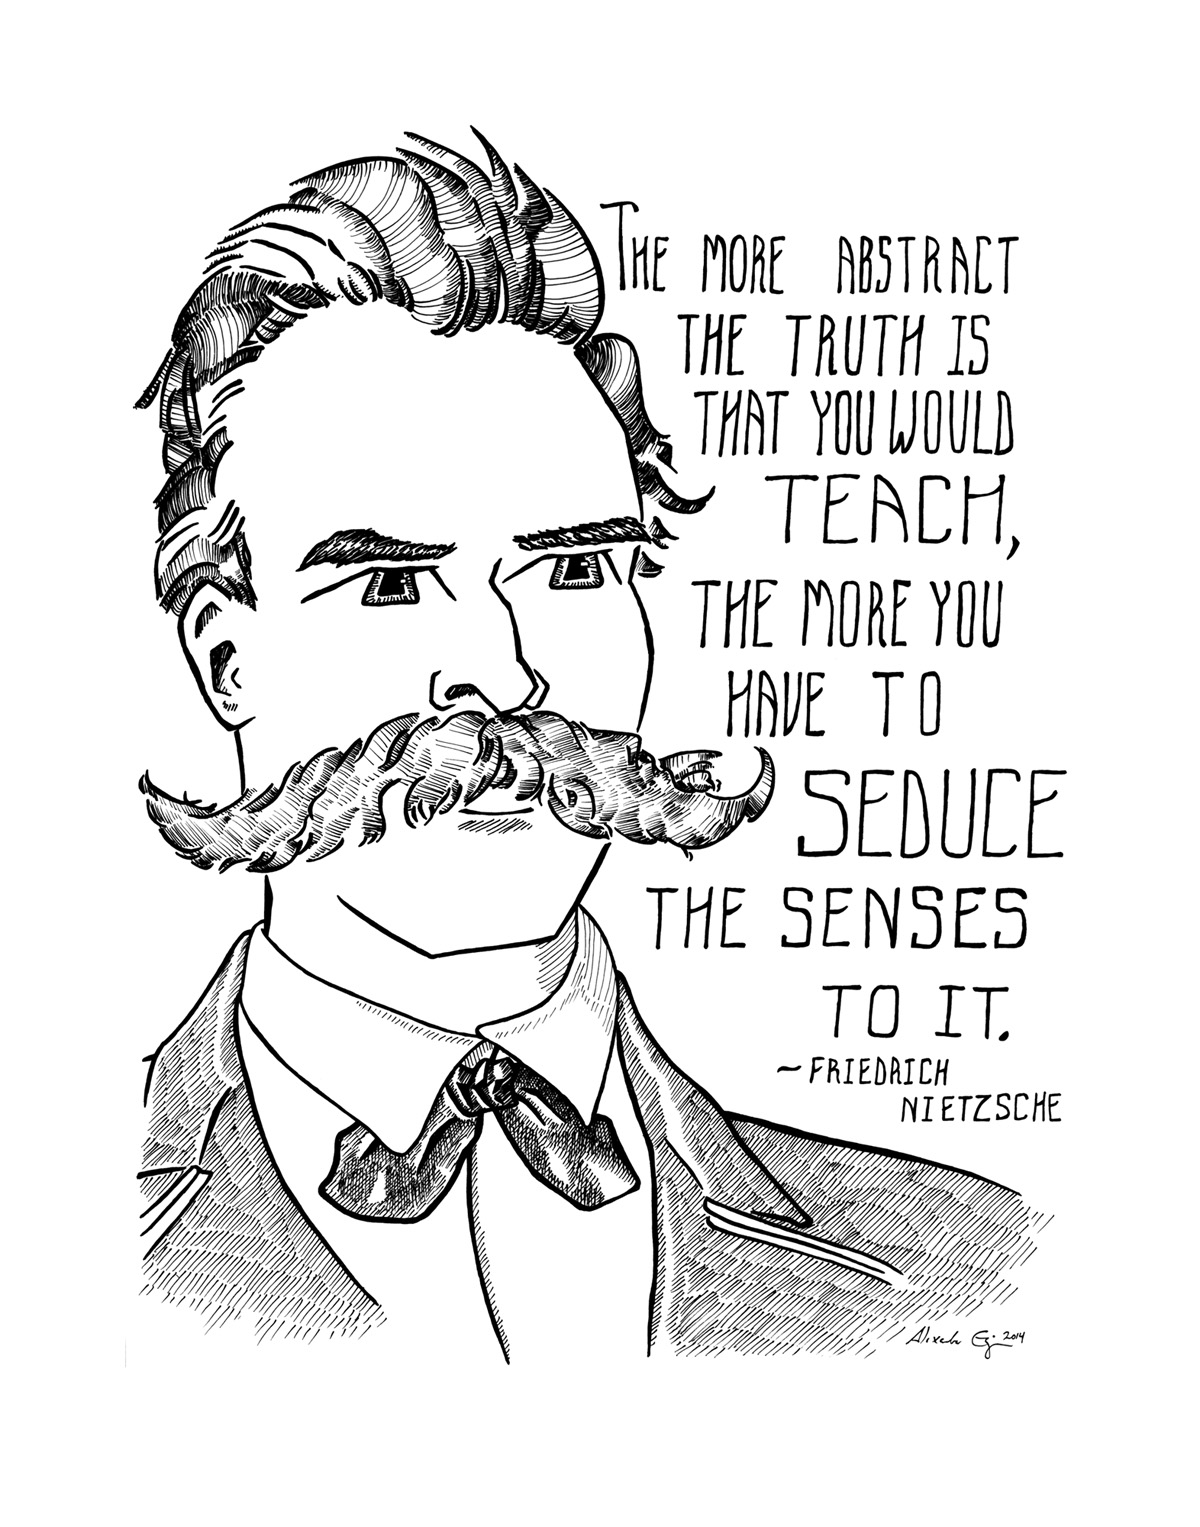 Pen and ink potrait of philosopher Friedrich Nietzsche with a quote from his writing